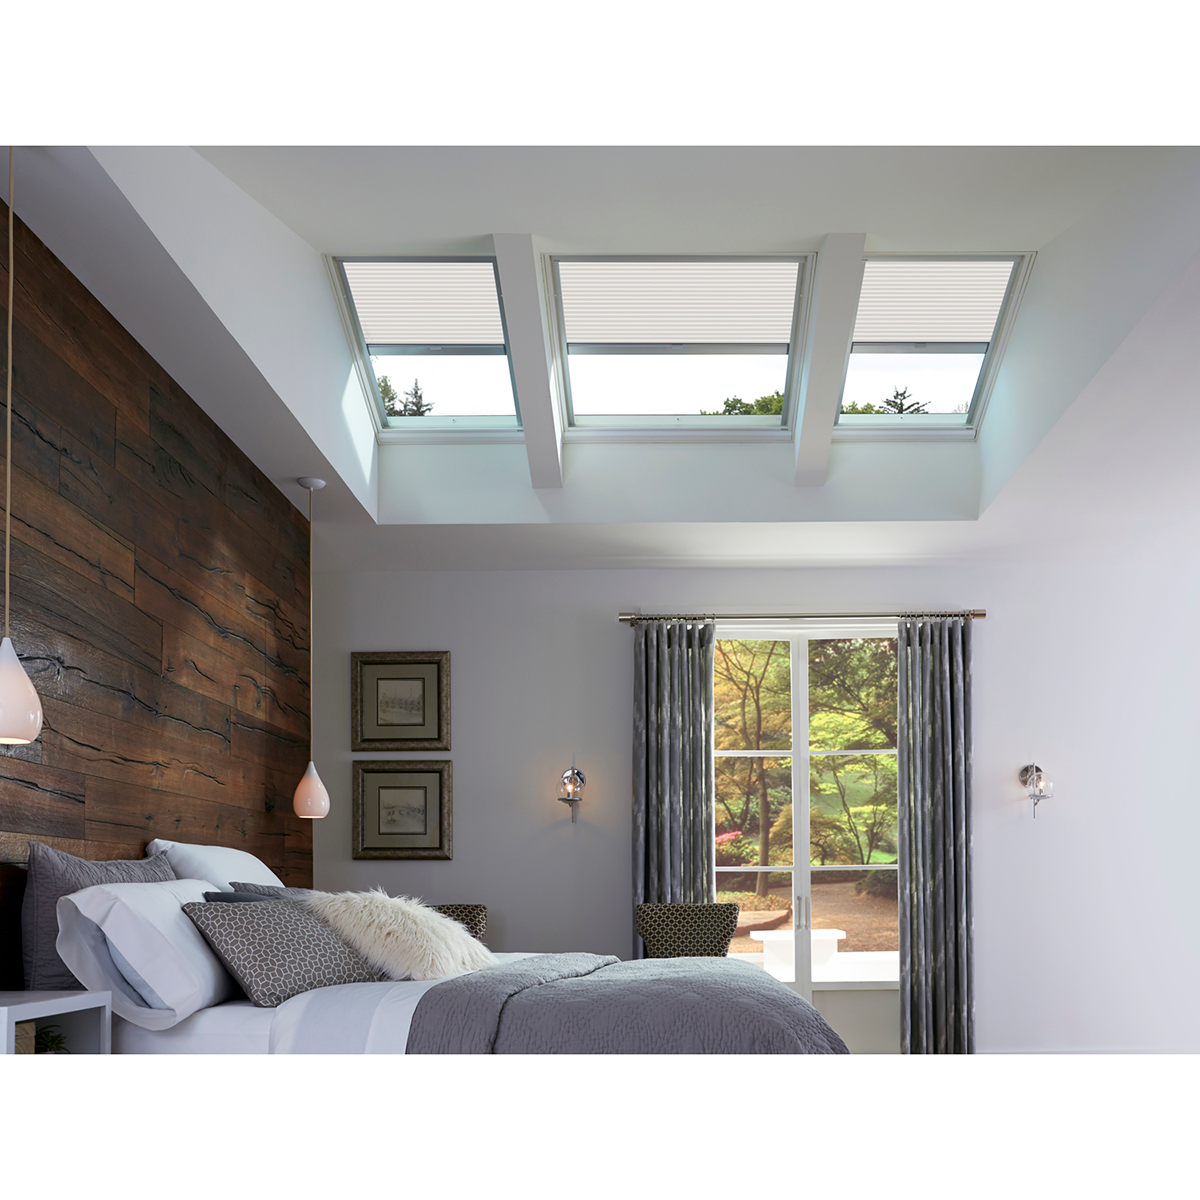 Fixed Self-Flashed Skylight with Laminated Low-E3 Glass - 30-1/2 in. x 30-1/2 in. - QPF 3030